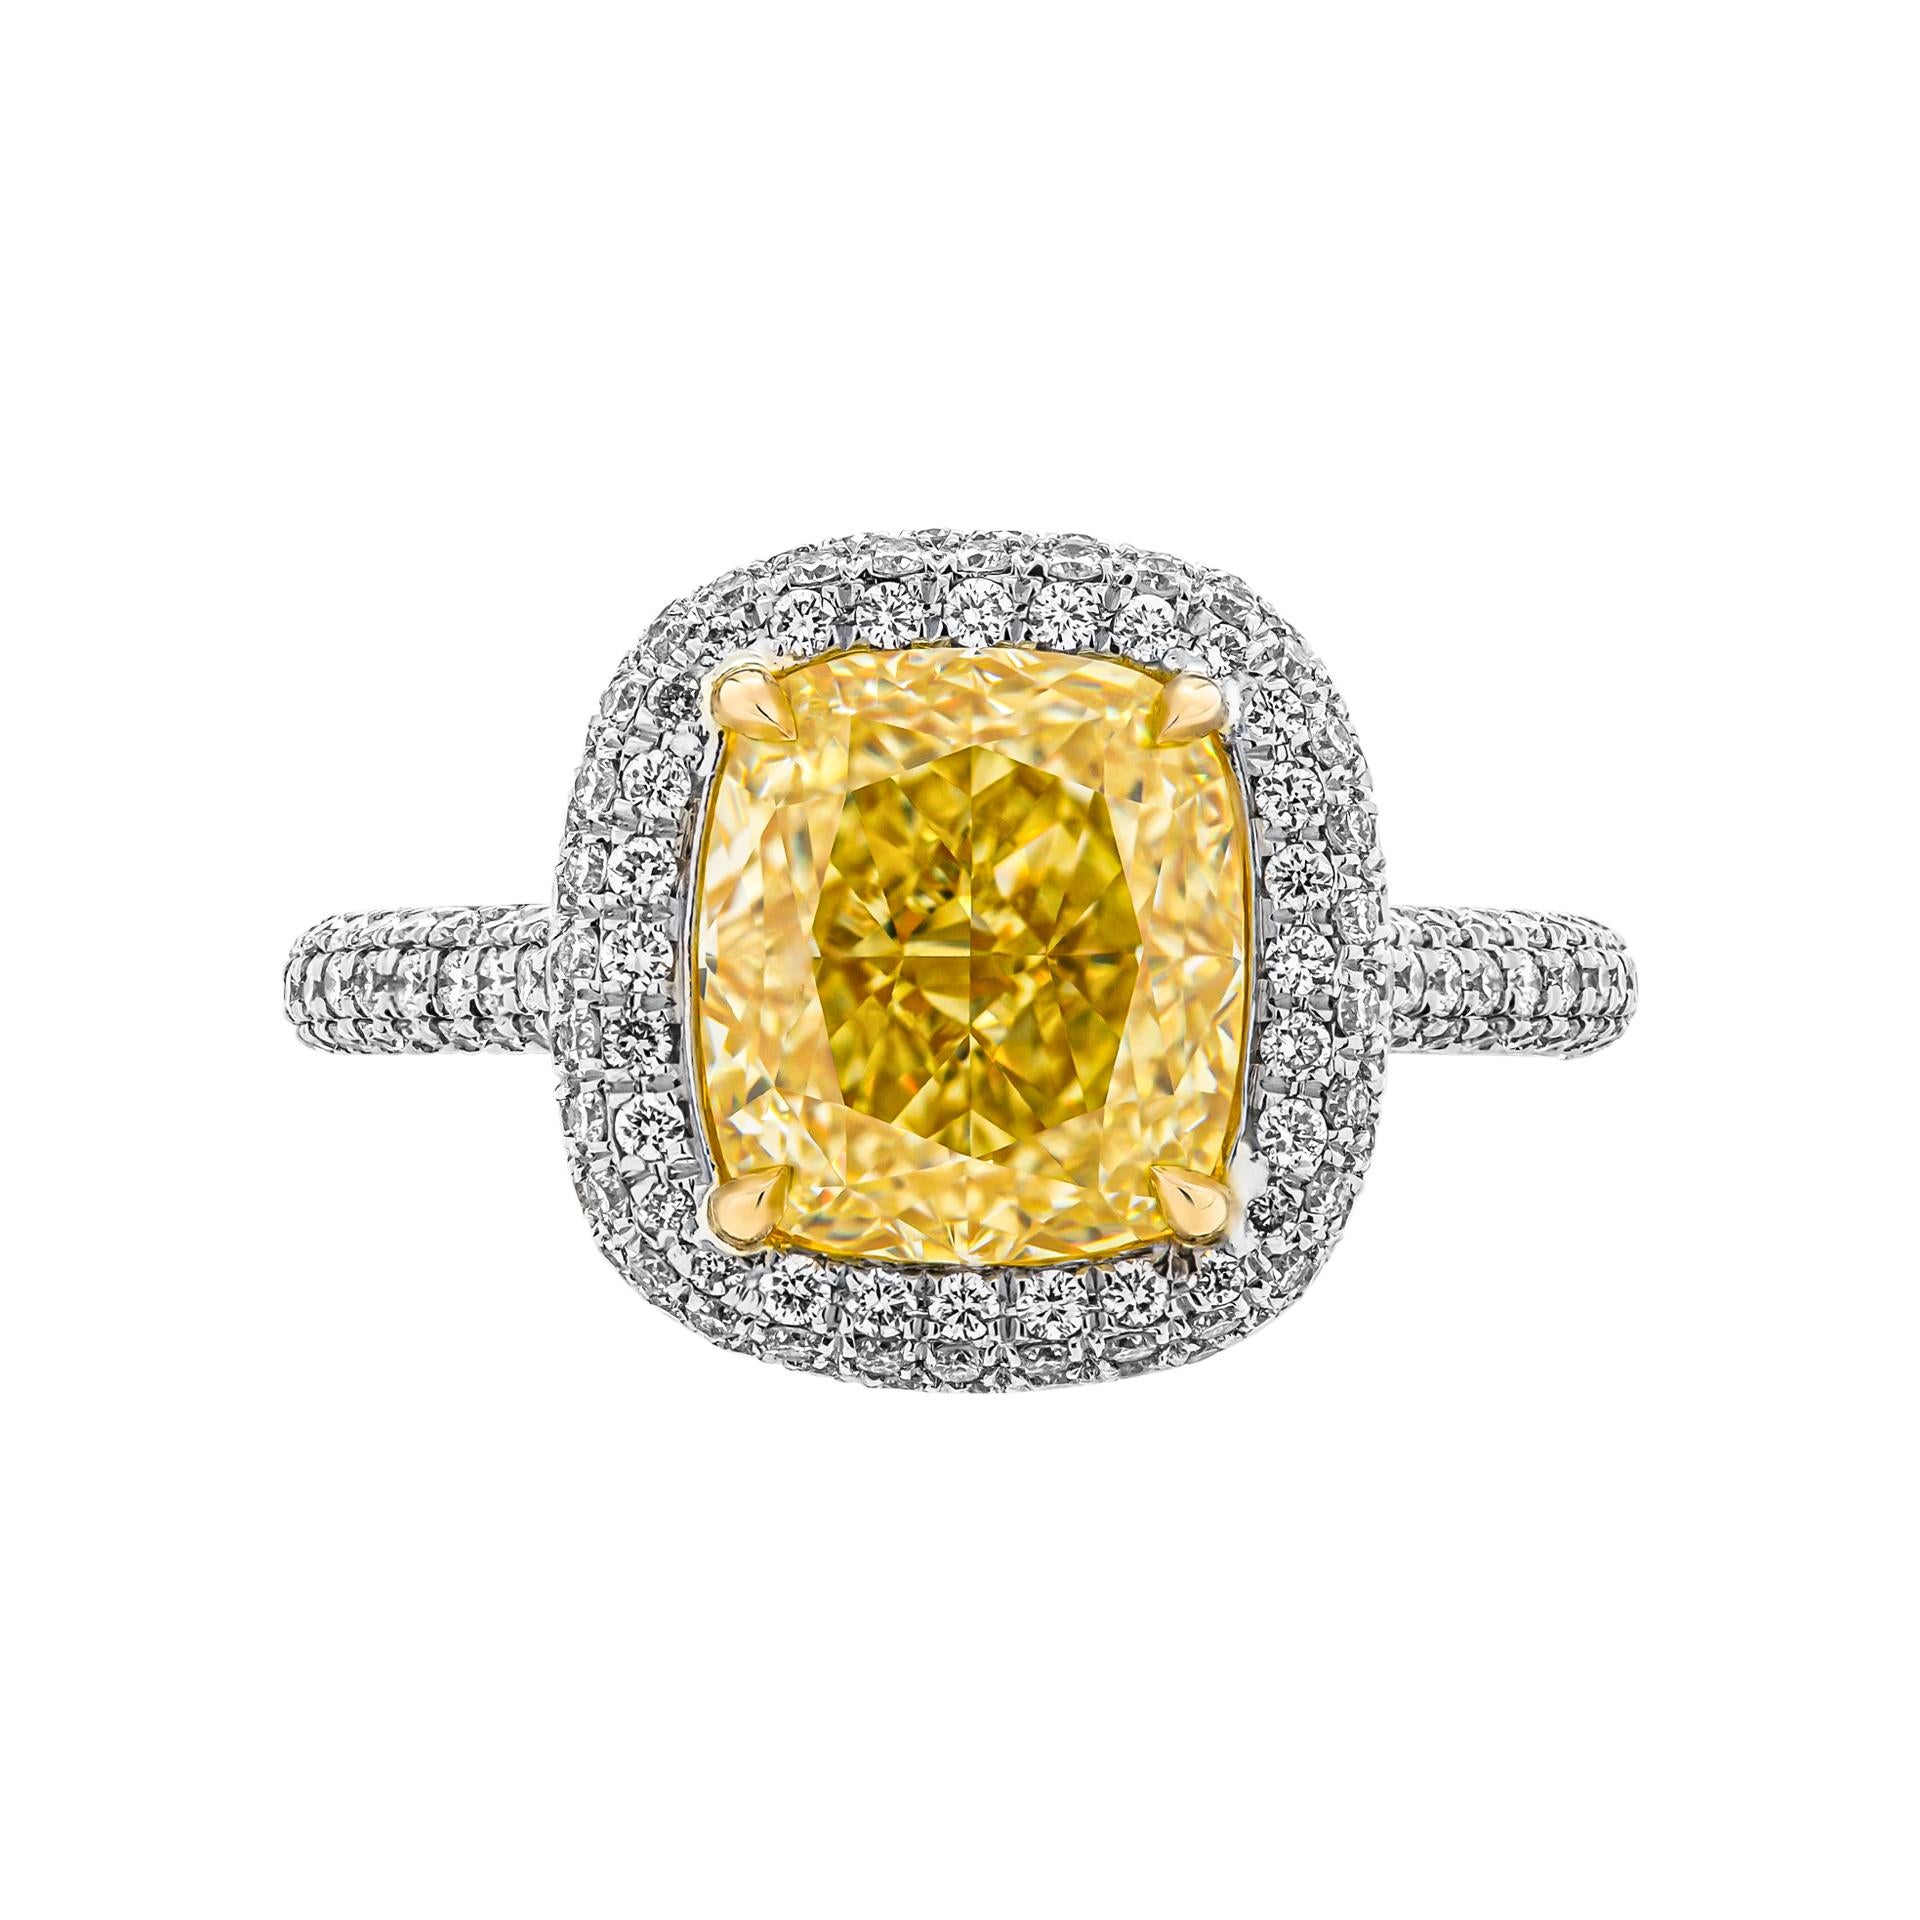 Engagement ring in PT950;
 Diamond 3 row cathedral shank w/ diamond bridge & stems; 
3 row halo around center stone
Center: 3.53ct Natural Fancy Yellow Even SI1 Cushion Shape Diamond GIA#2225125725 
Setting total carat weight: 0.8ct
 Size: 6

Comes